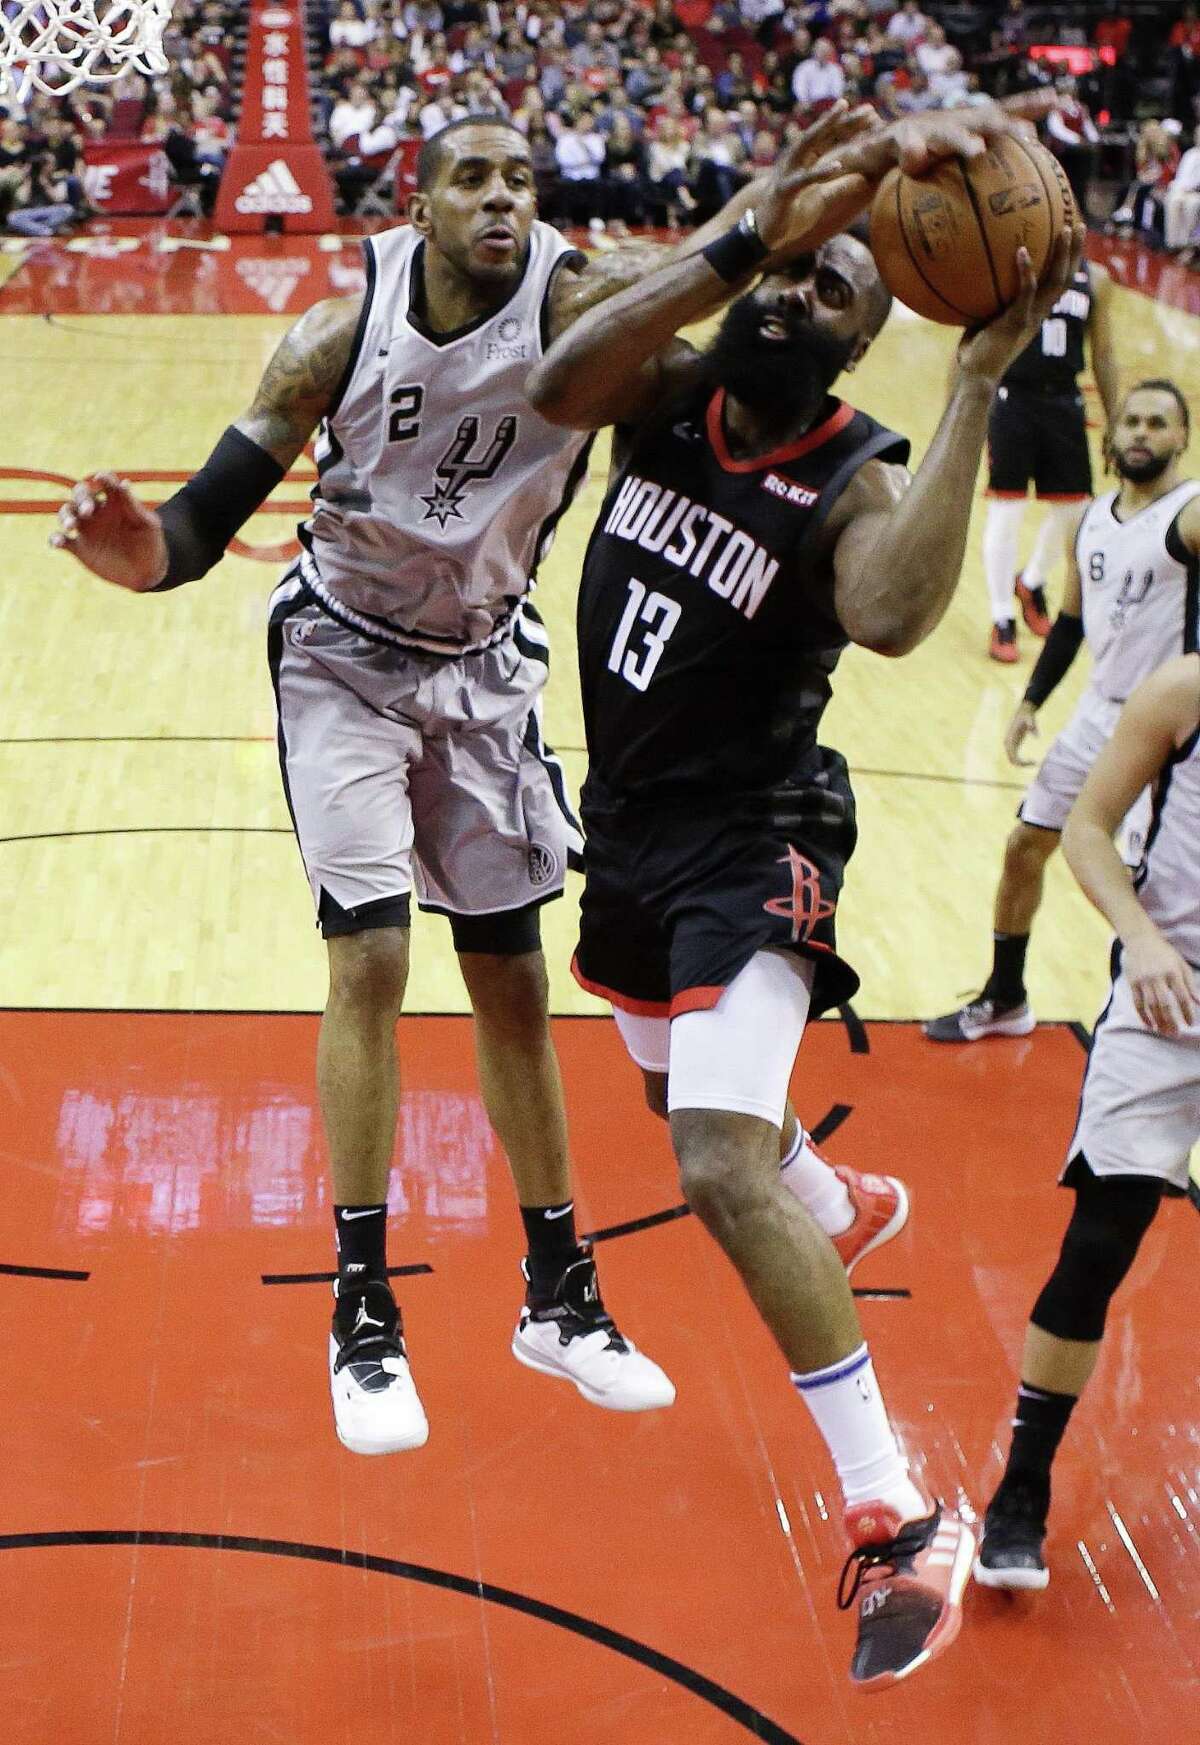 Houston Rockets guard James Harden (13) drives to the basket as San Antonio Spurs center LaMarcus Aldridge defends during the first half of an NBA basketball game Friday, March 22, 2019, in Houston. (AP Photo/Eric Christian Smith)